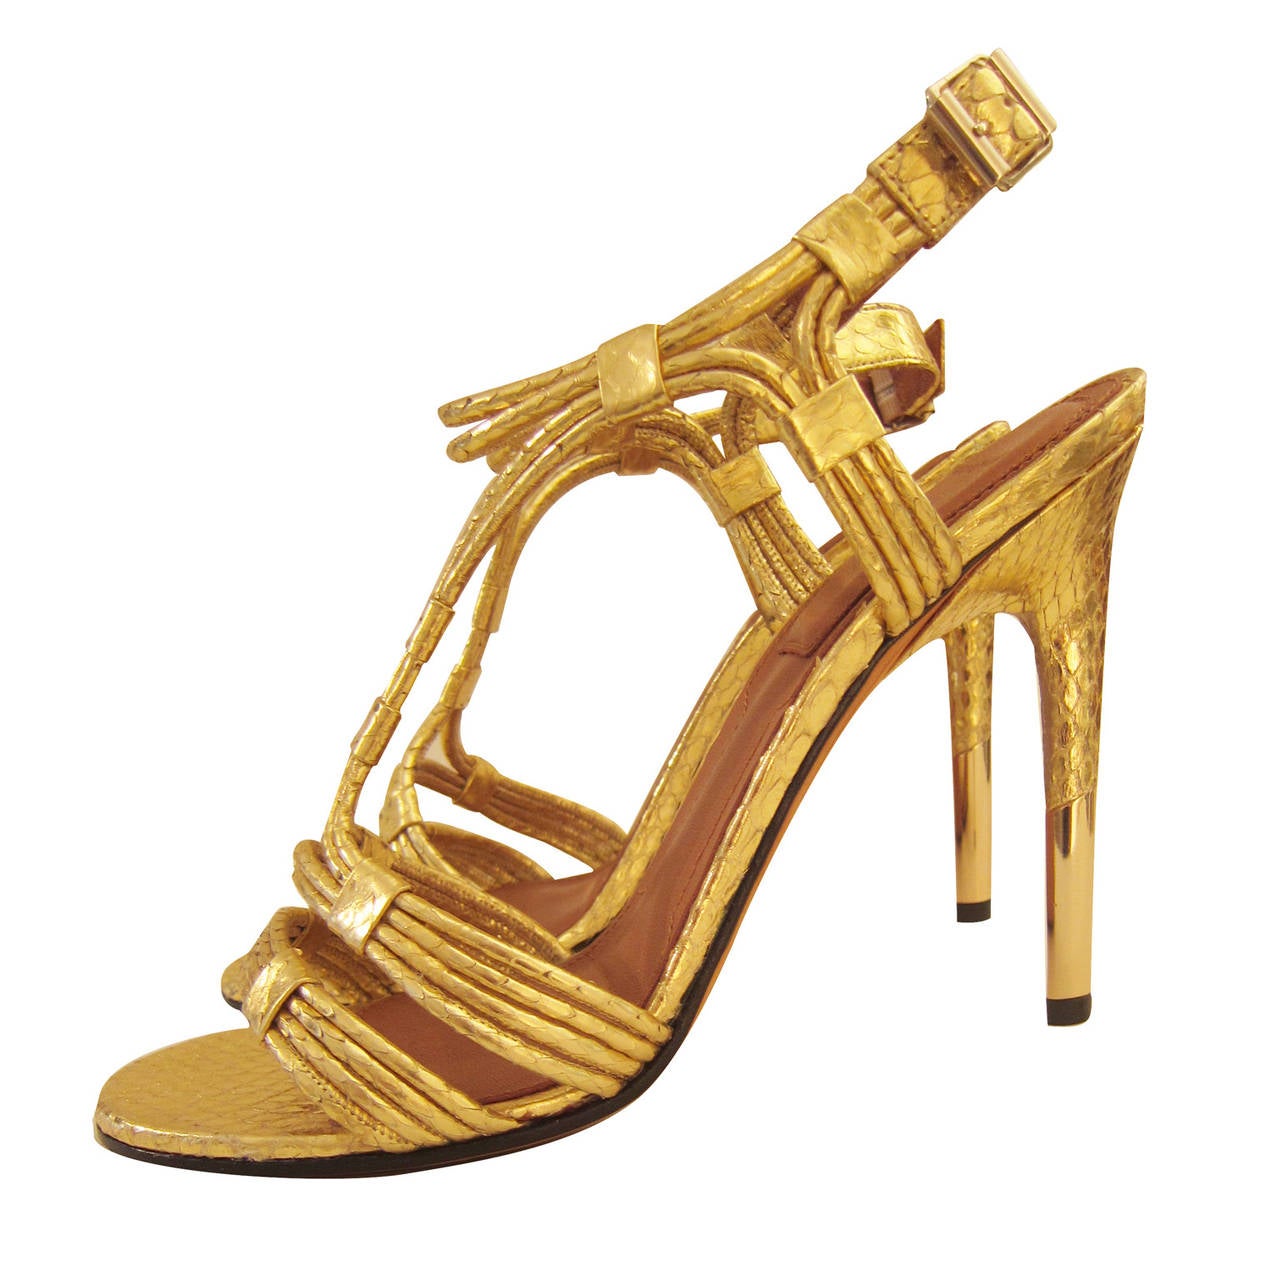 Givenchy’s metallic gold python sandals with a brand embossed insole with a high heel. Made in Italy.